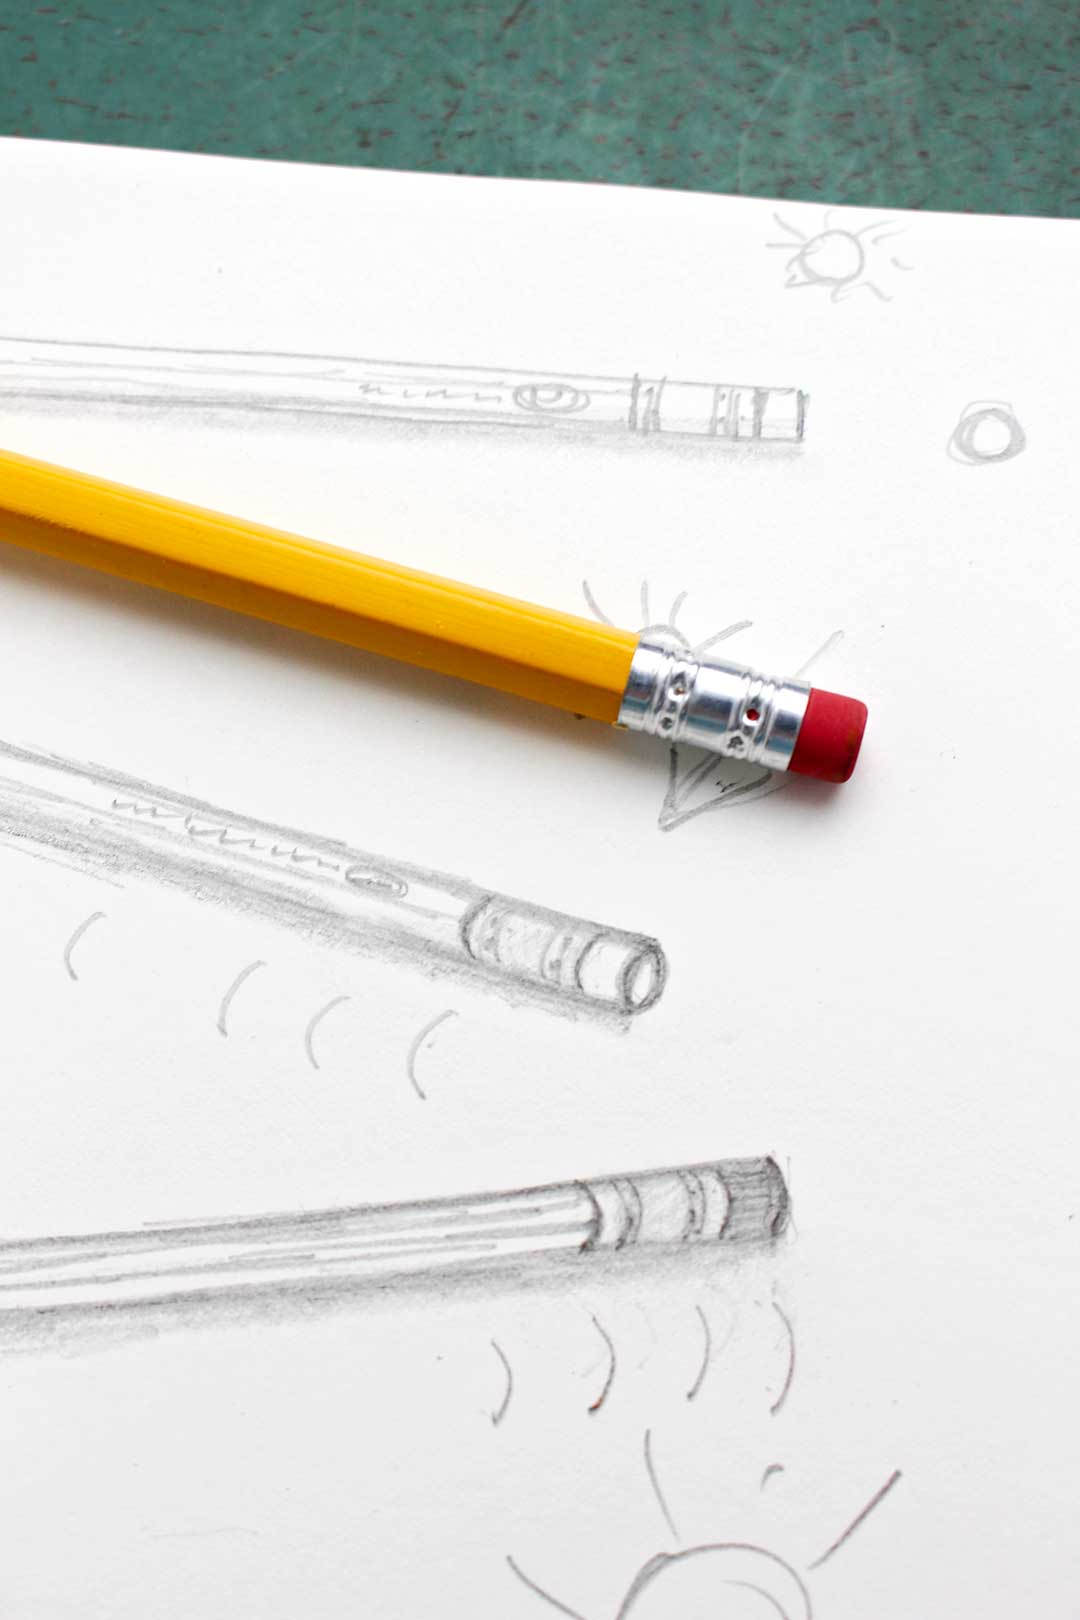 Close up view of the metal and eraser part of the pencil resting on sketch pad.